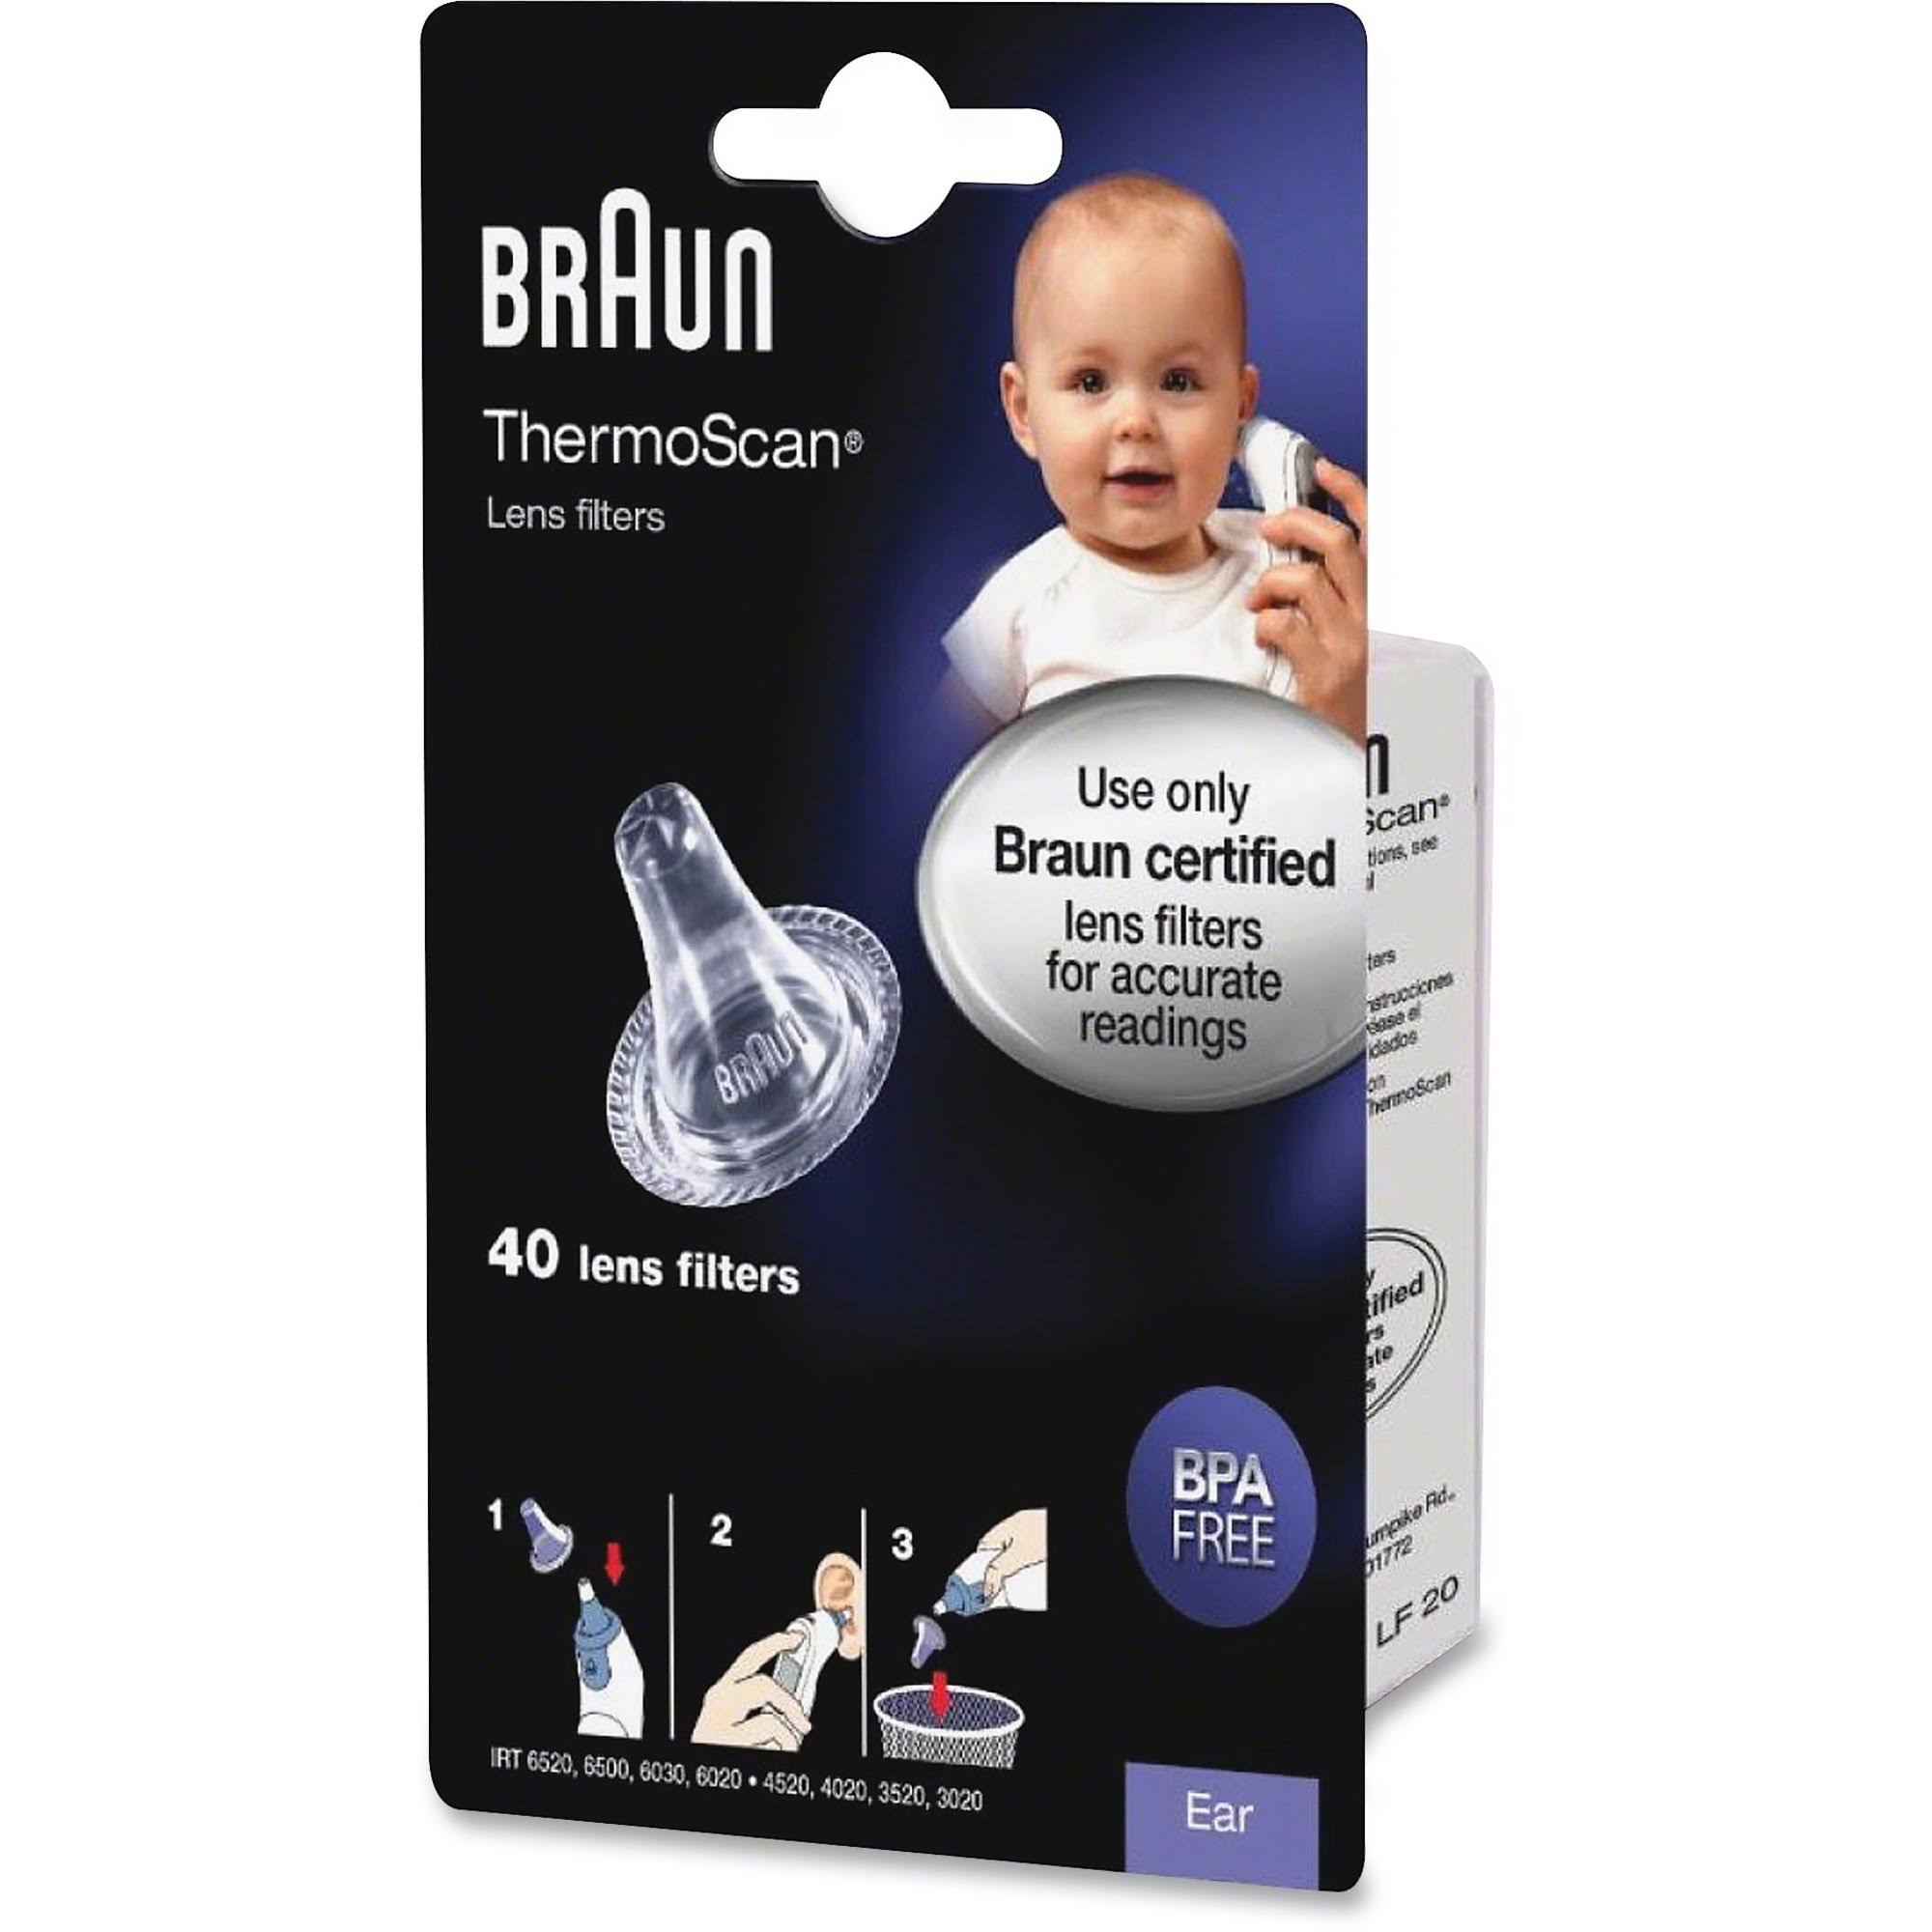 Braun Thermoscan Lens Filters - 40 Lens Filters